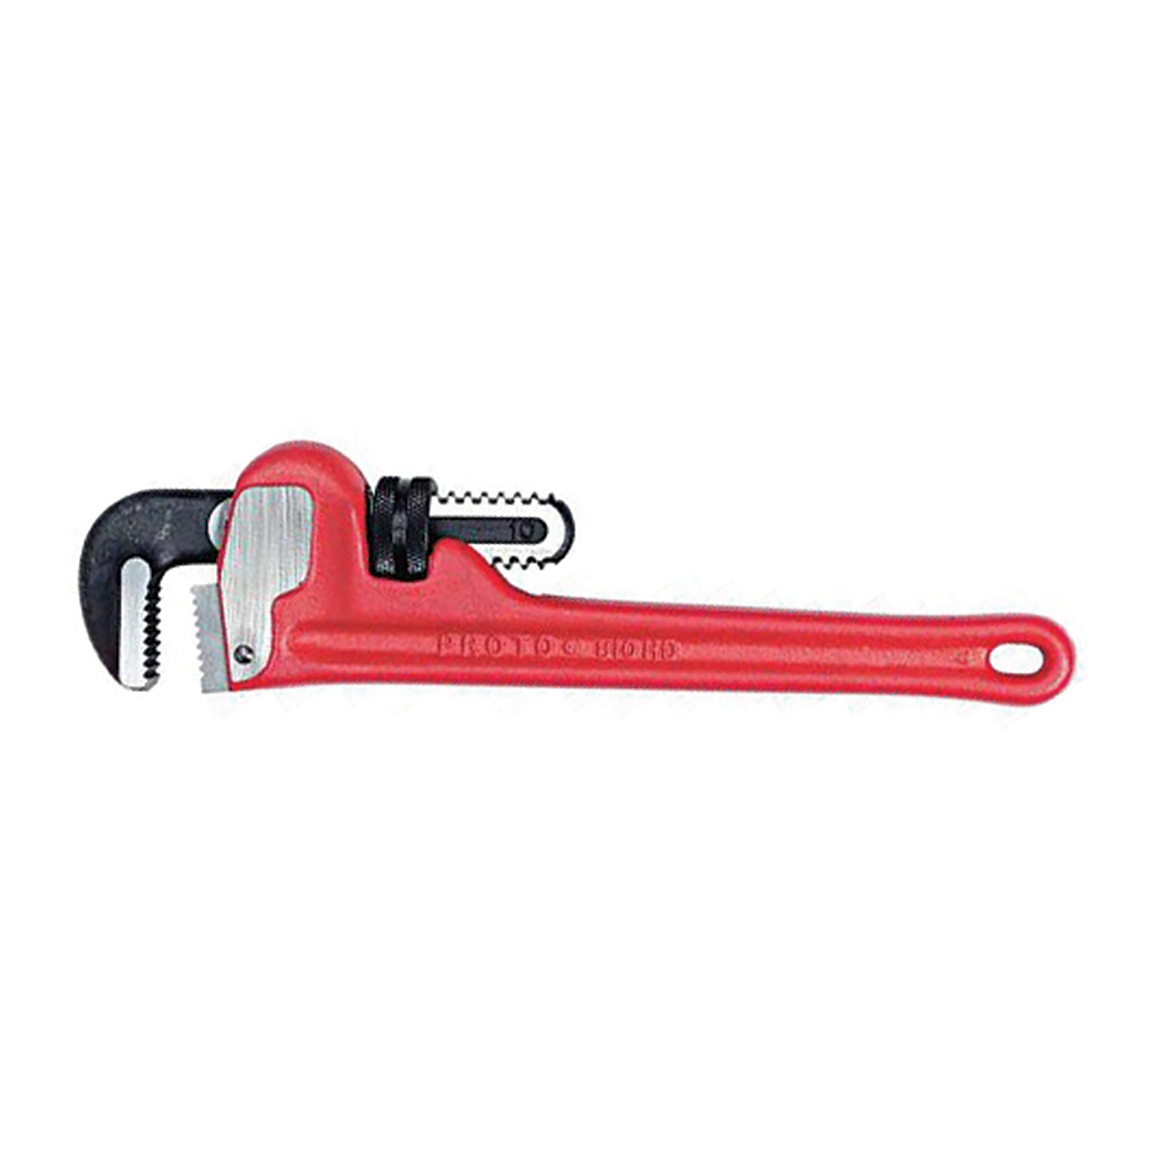 One-handed corner pipe wrench, 90°, 14